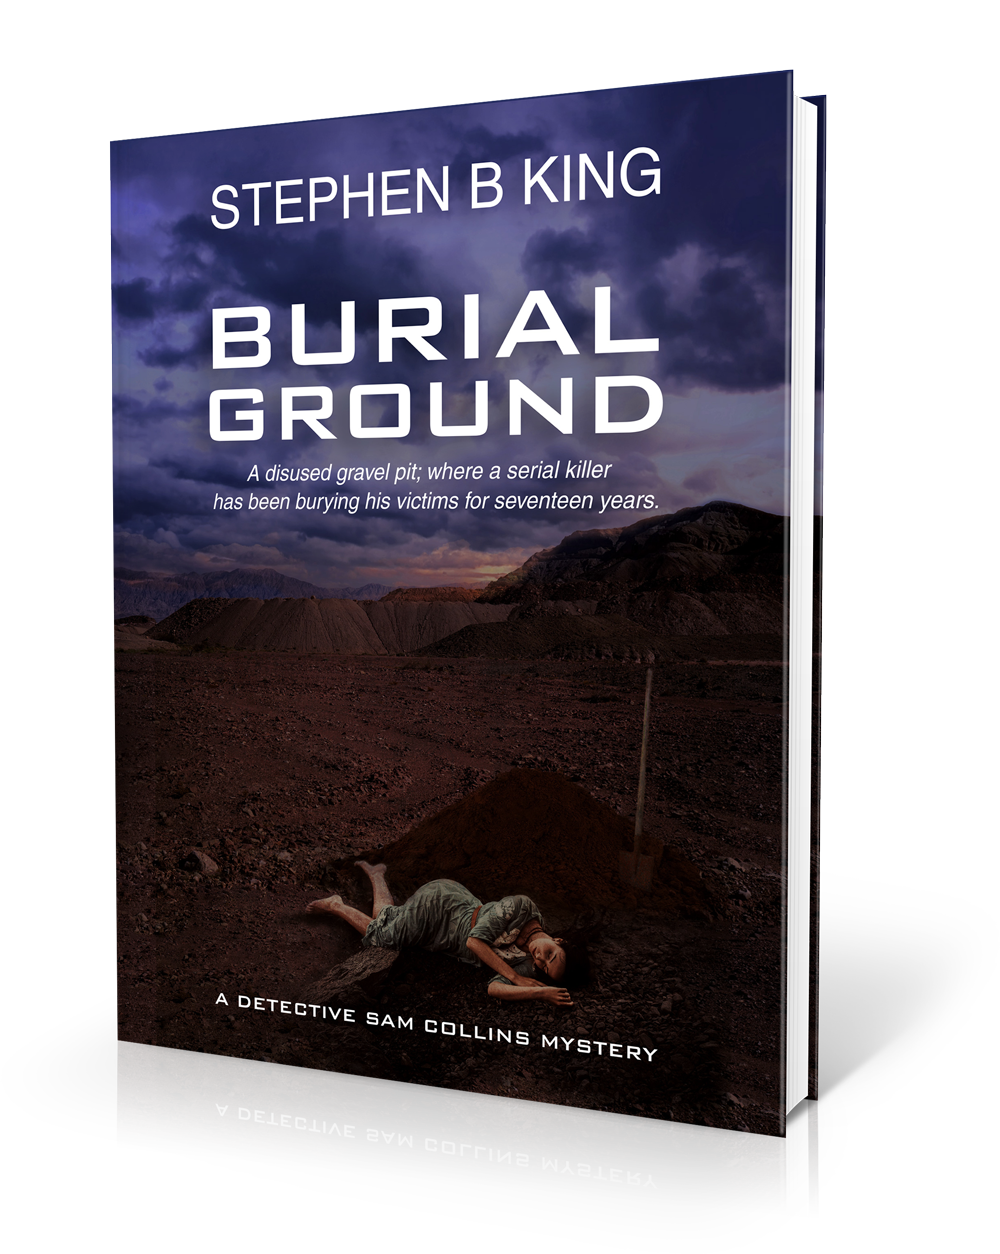 Burial Ground by Stephen B King